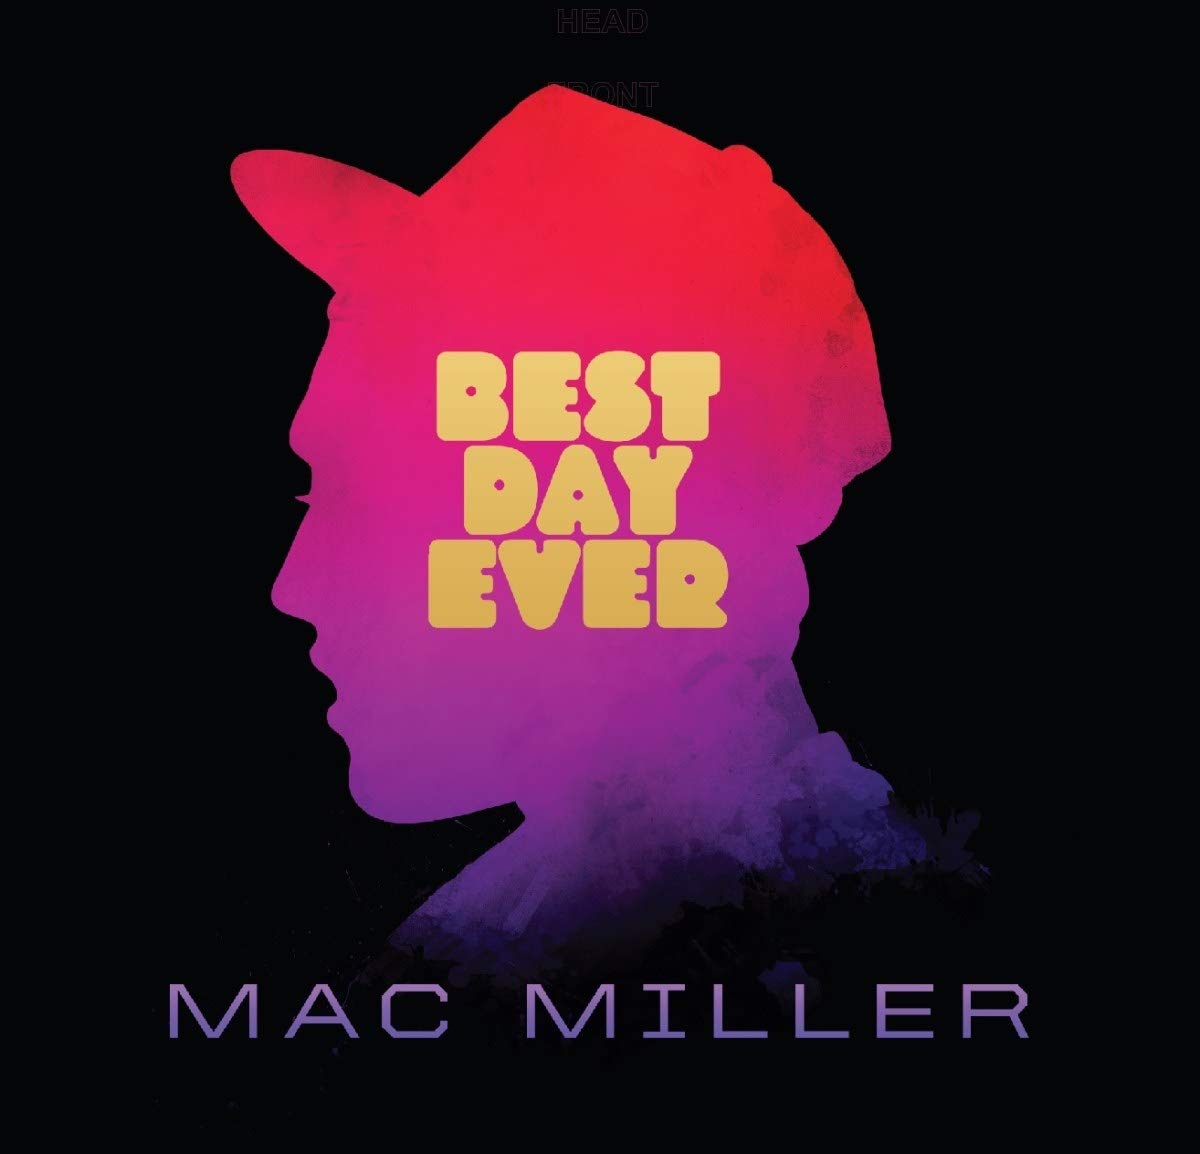 The Best Day Ever (6.75/10)- I feel like BDE didn't have the charm and hits that KIDS had. It seemed rather average, Mac hadn't found his identity yet and instead played it safe. Donald Trump and BDE Bonus are exceptions, being some of my favorite songs Mac has ever made.